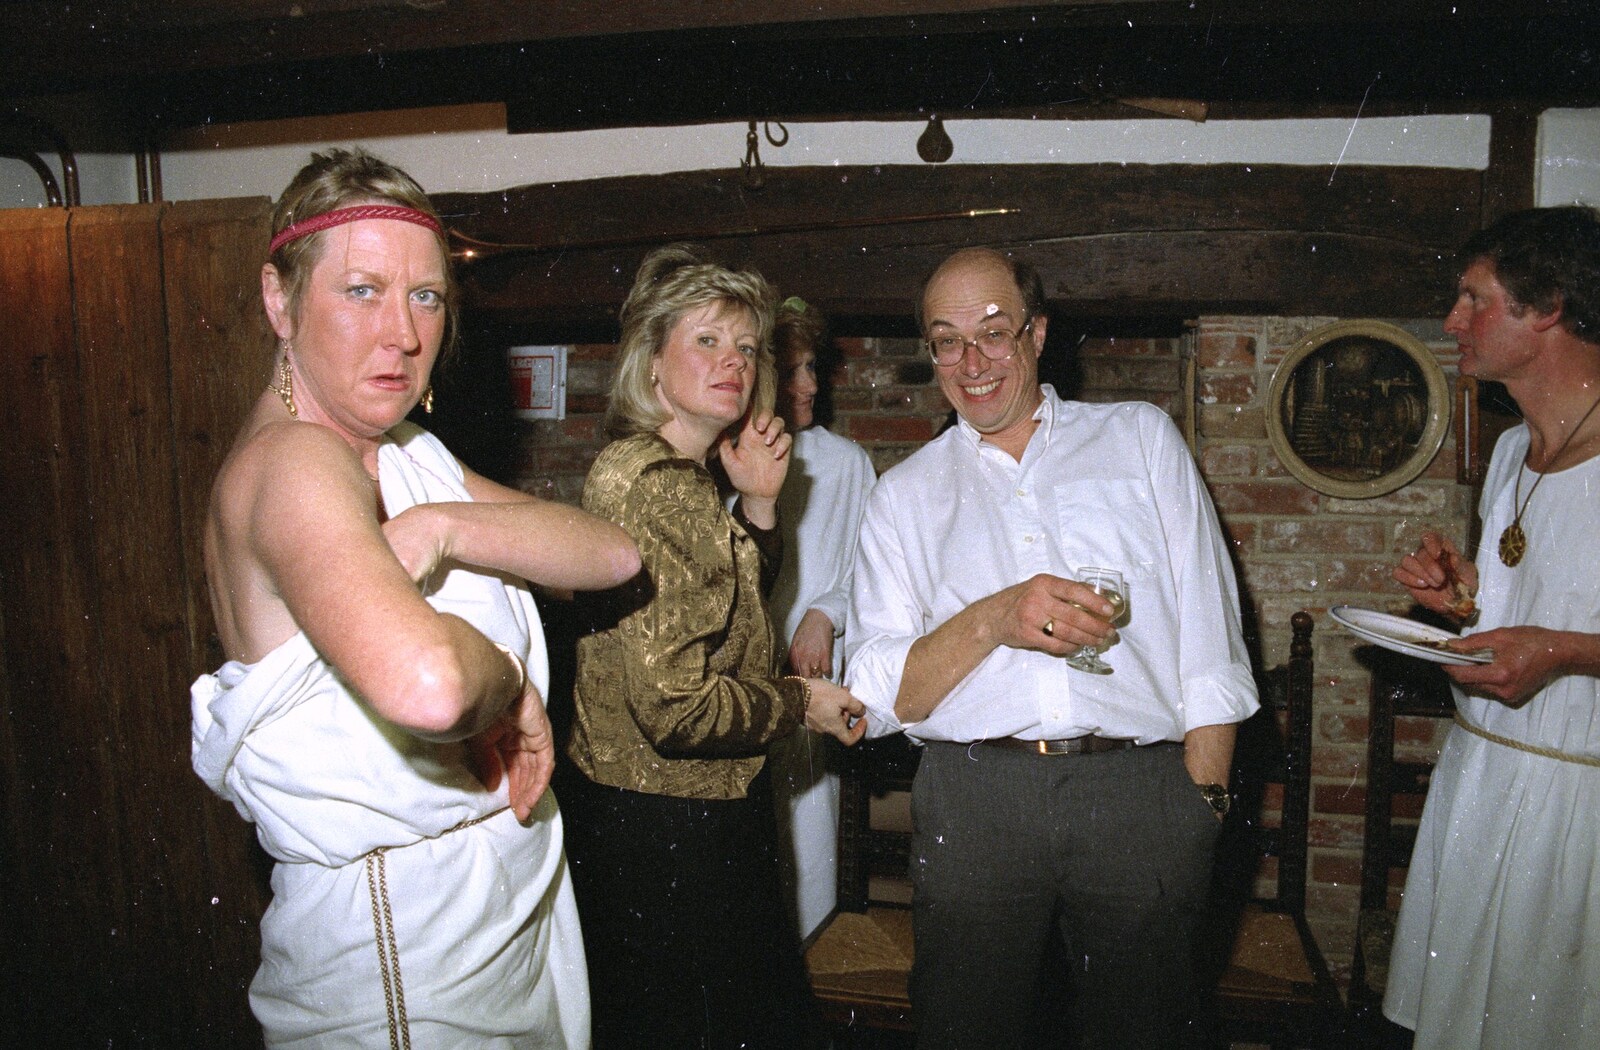 Sue does a wardrobe adjustment from Geoff and Brenda's Pre-Christmas Toga Party, Stuston, Suffolk - 17th December 1991